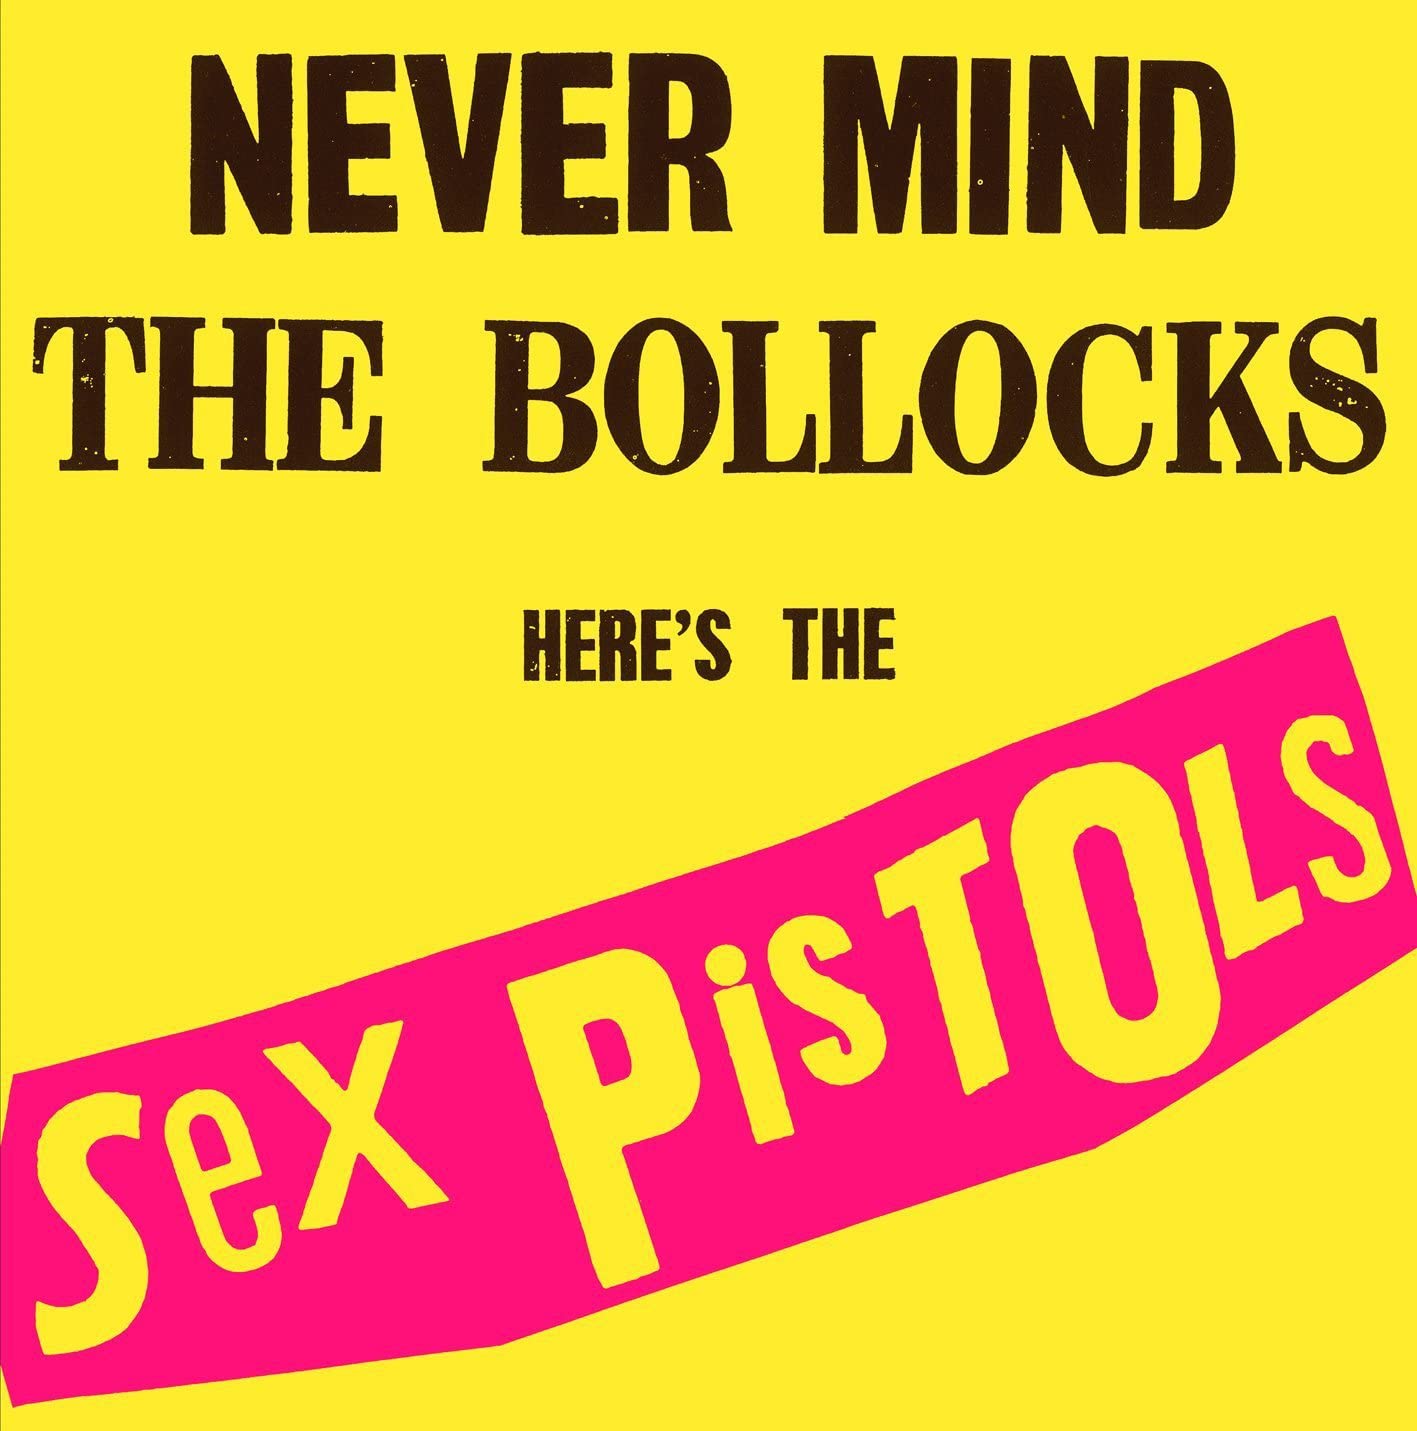 Sex Pistols: Albums Ranked from Worst to Best